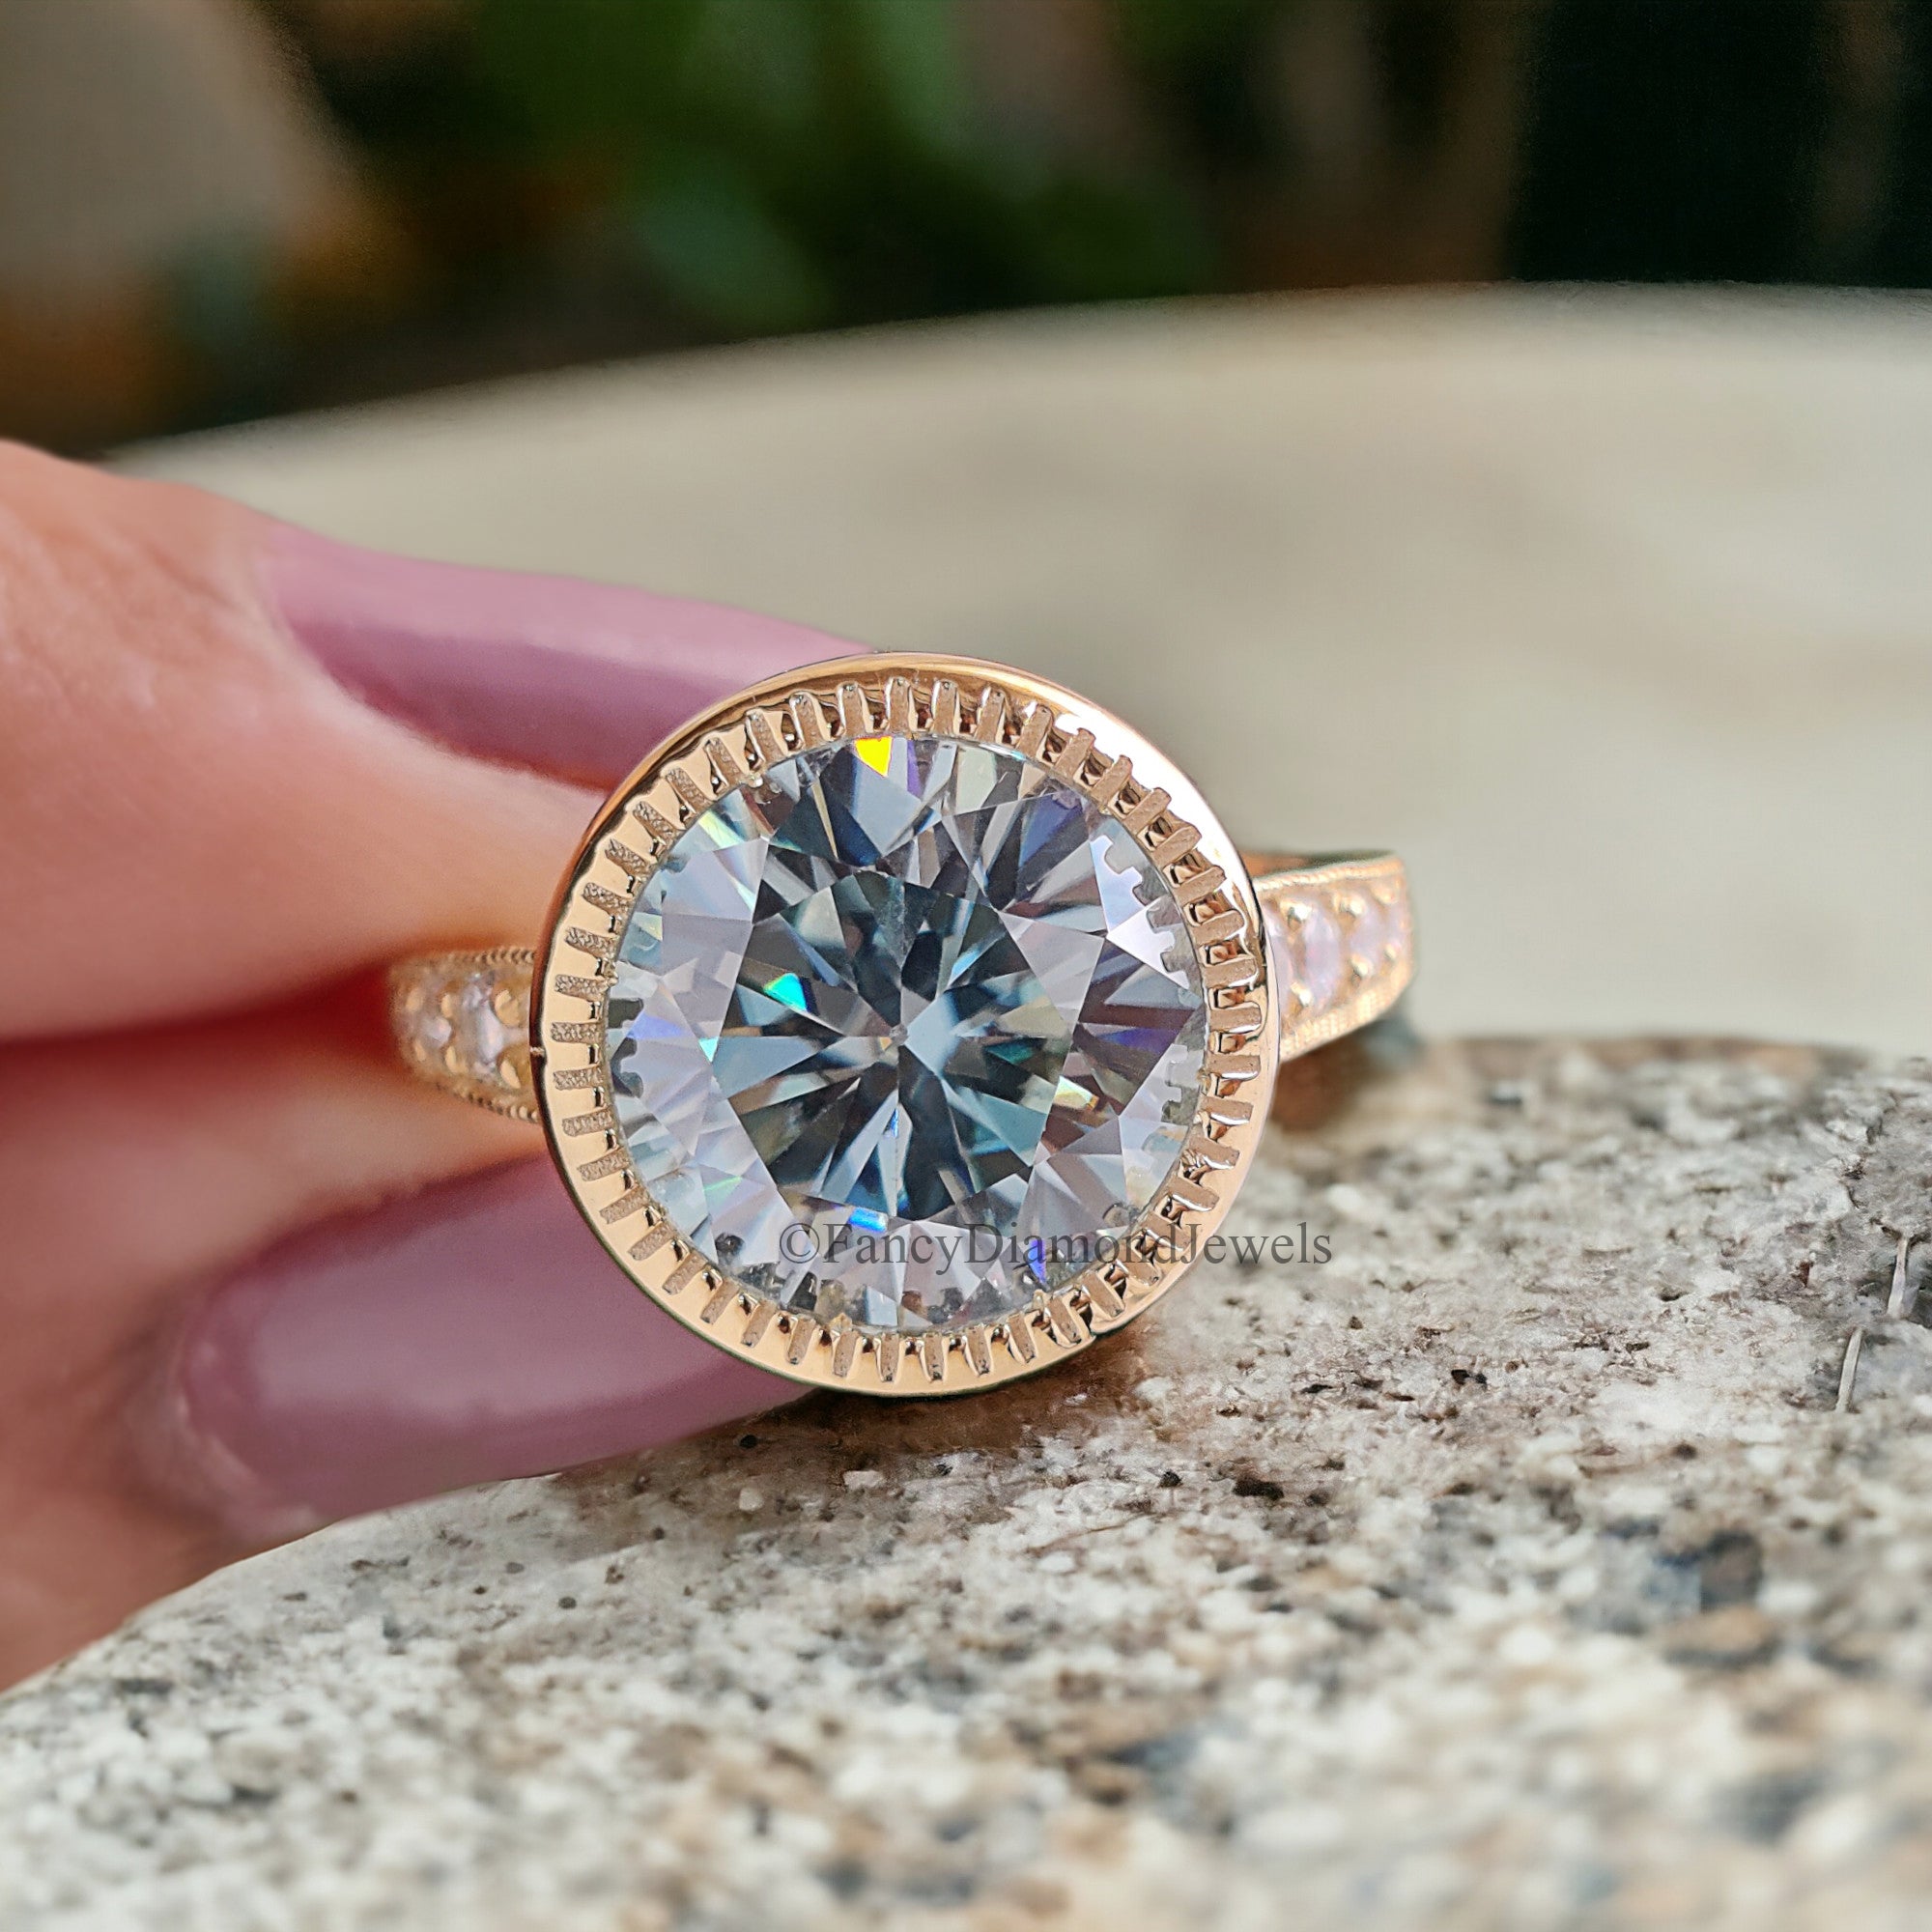 Round Cut Aqua Blue Moissanite Engagement Wedding Ring 14K Solid Gold Anniversary Ring Proposal Bezel Ring Authentic Moissanite Ring FD177